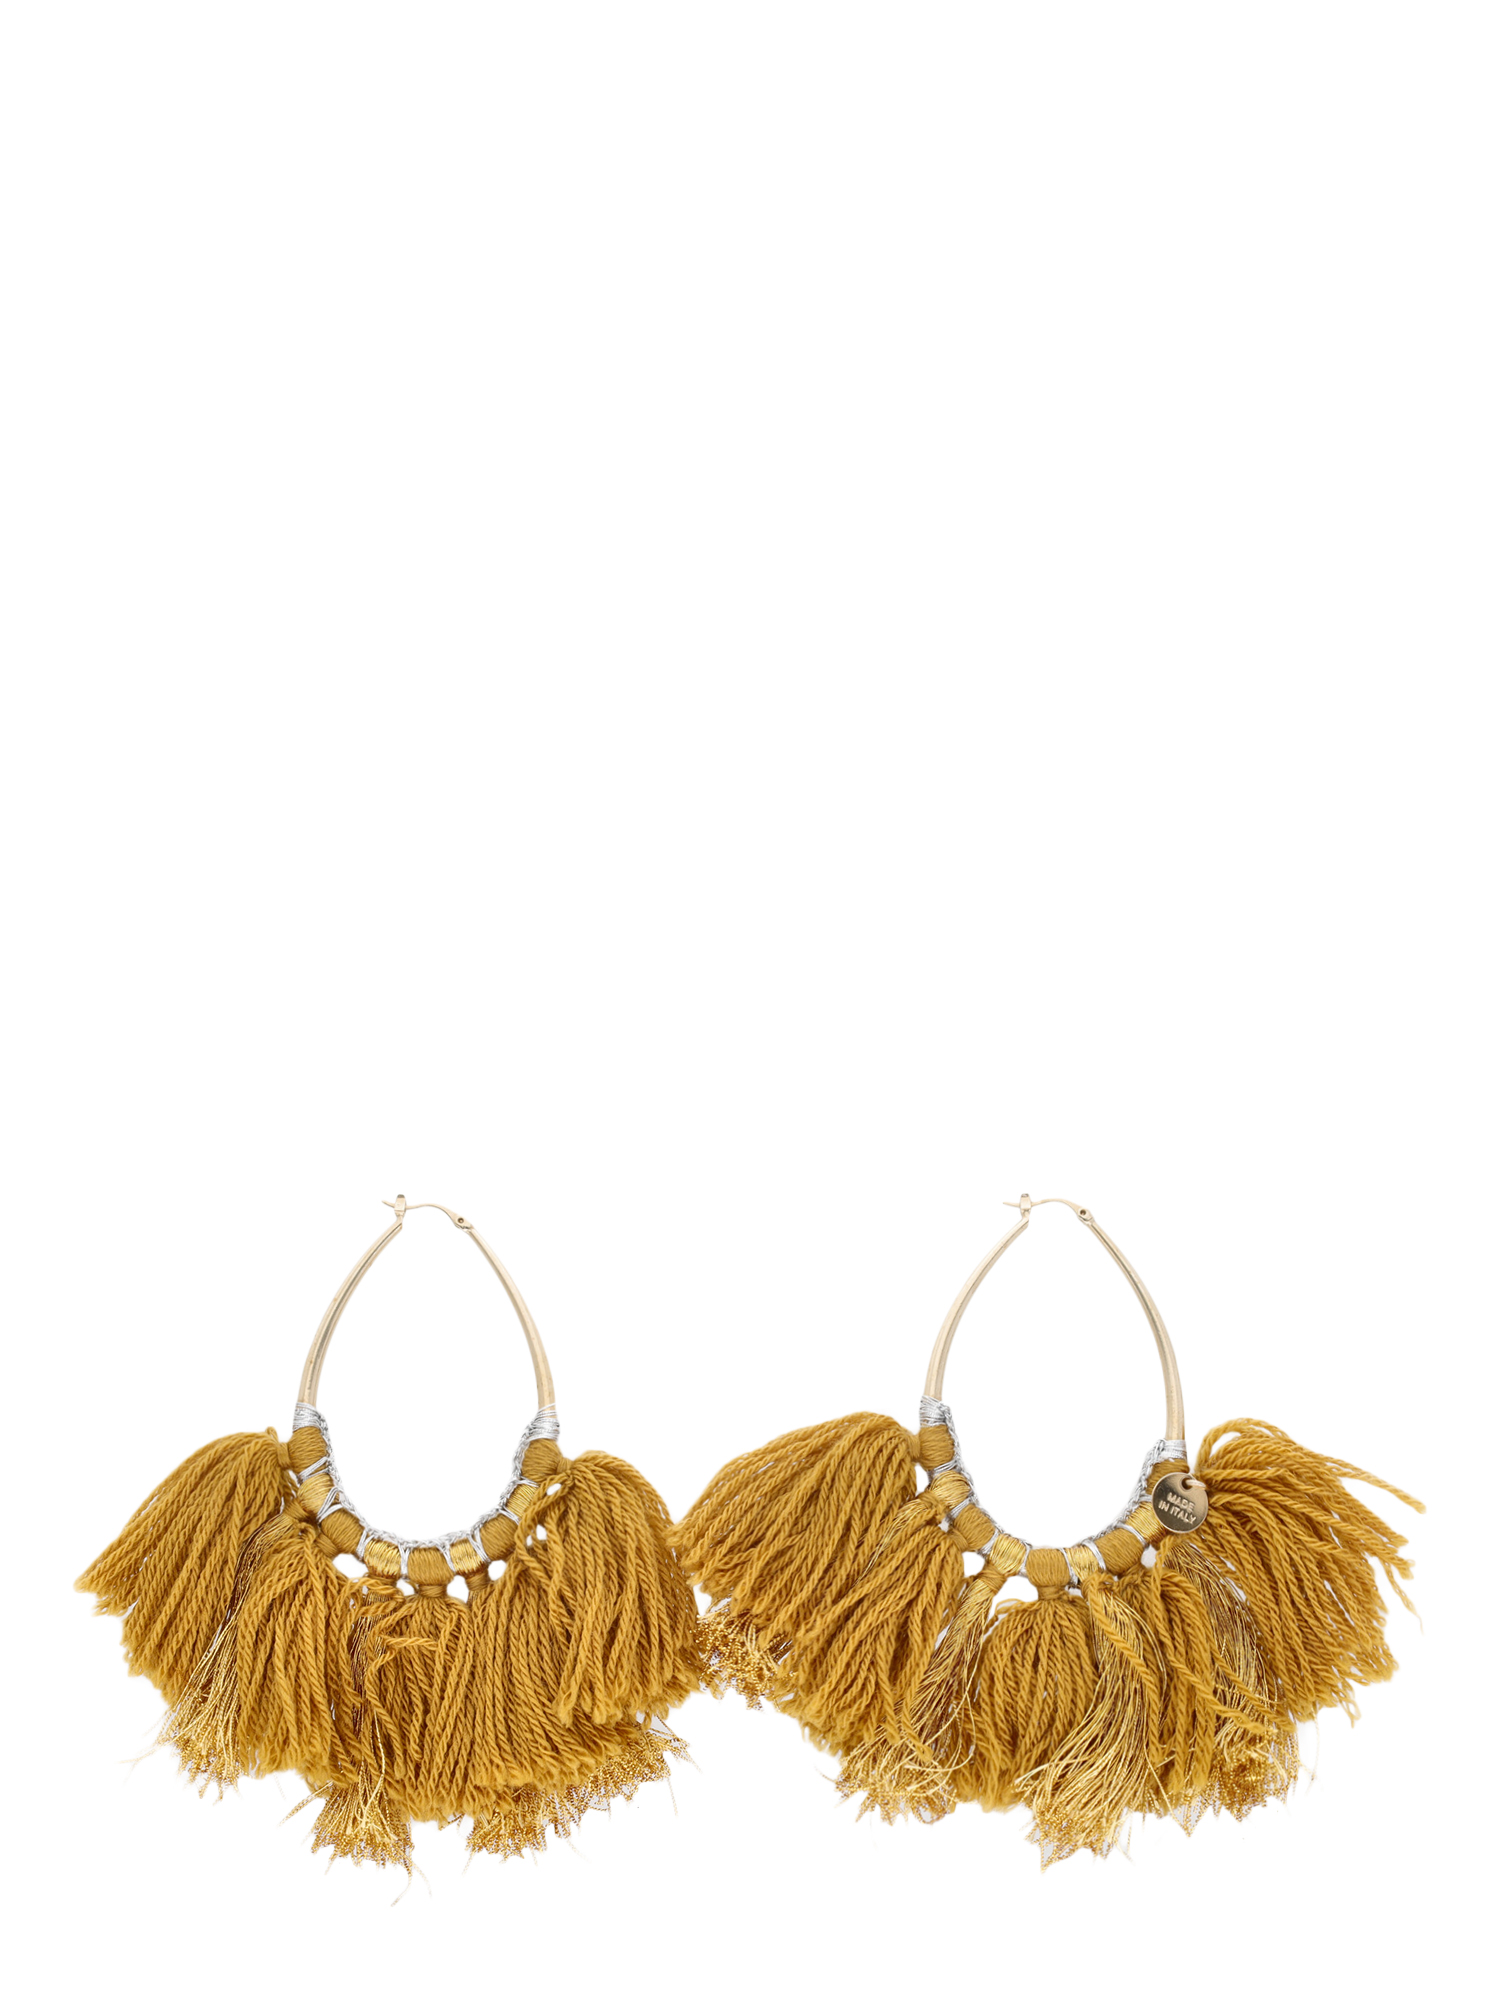 Pre-owned Missoni Earrings In Camel Color, Gold